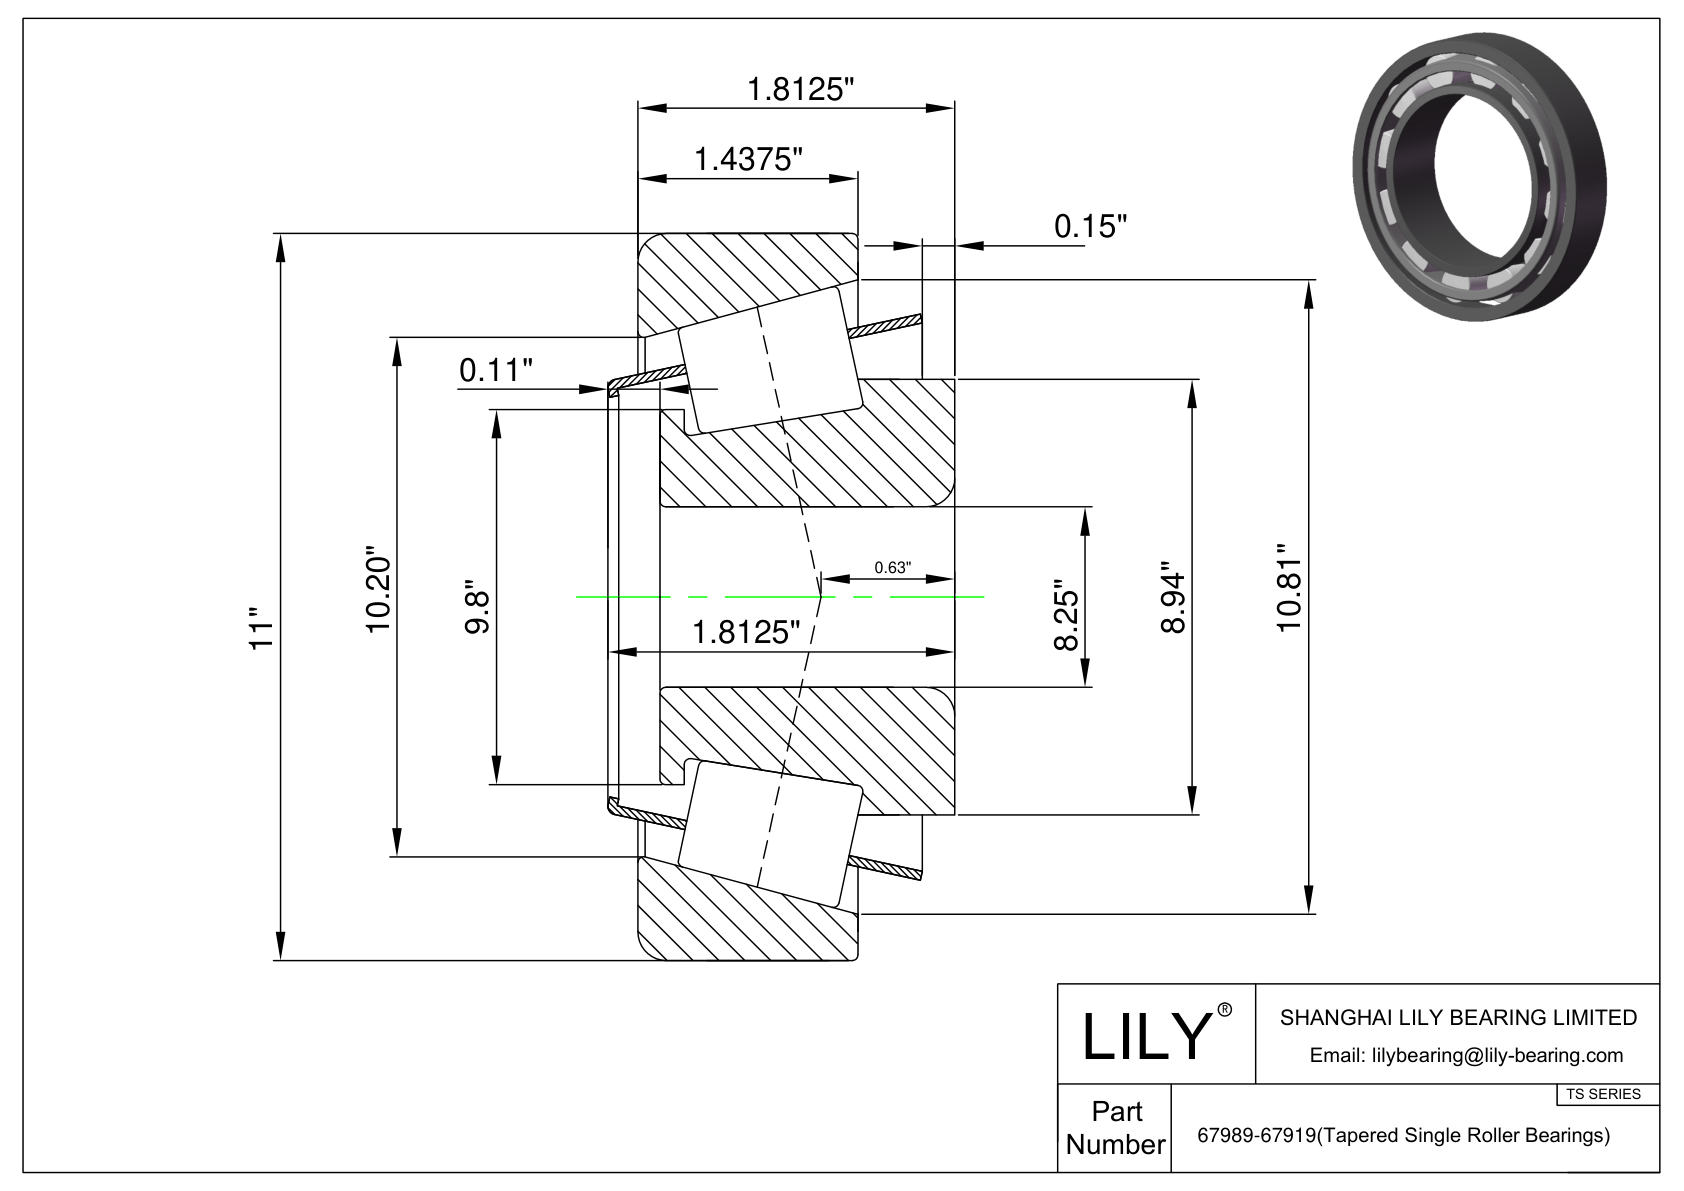 67989-67919 TS (Tapered Single Roller Bearings) (Imperial) cad drawing